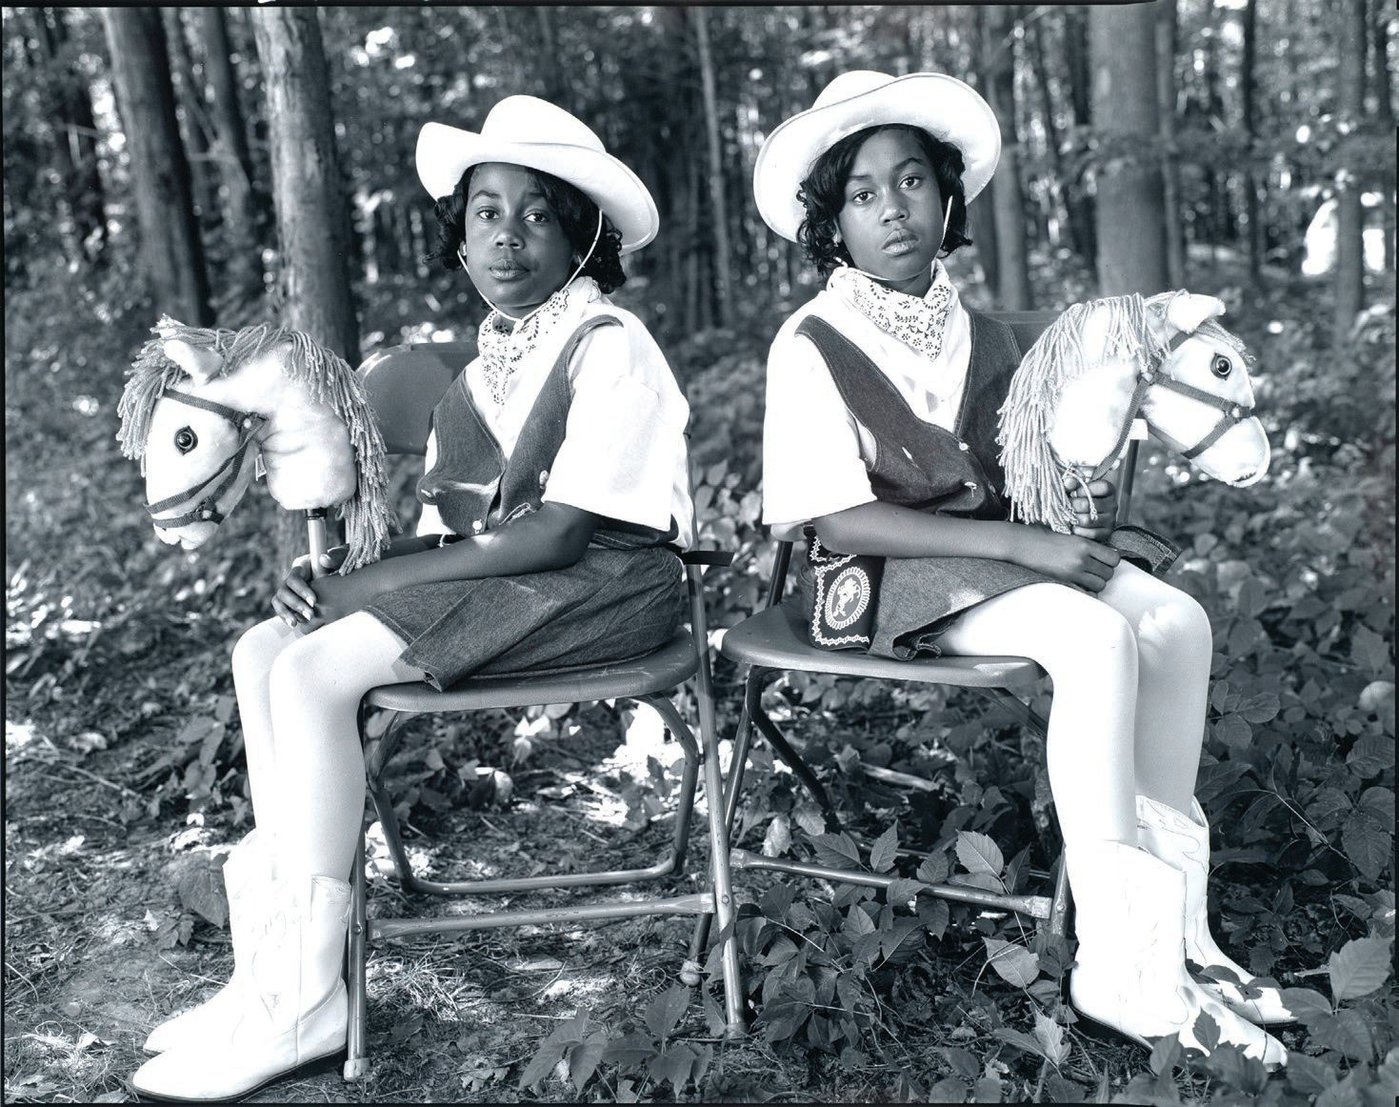 Mary Ellen Mark, “Tashara and Tanesha Reese, Twins Days Festival, Twinsburg, Ohio” (1998, gelatin silver print), 20 inches by 24 inches, NMWA, gift of Robert and Kathi Steinke, © Mary Ellen Mark/The Mary Ellen Mark Foundation.